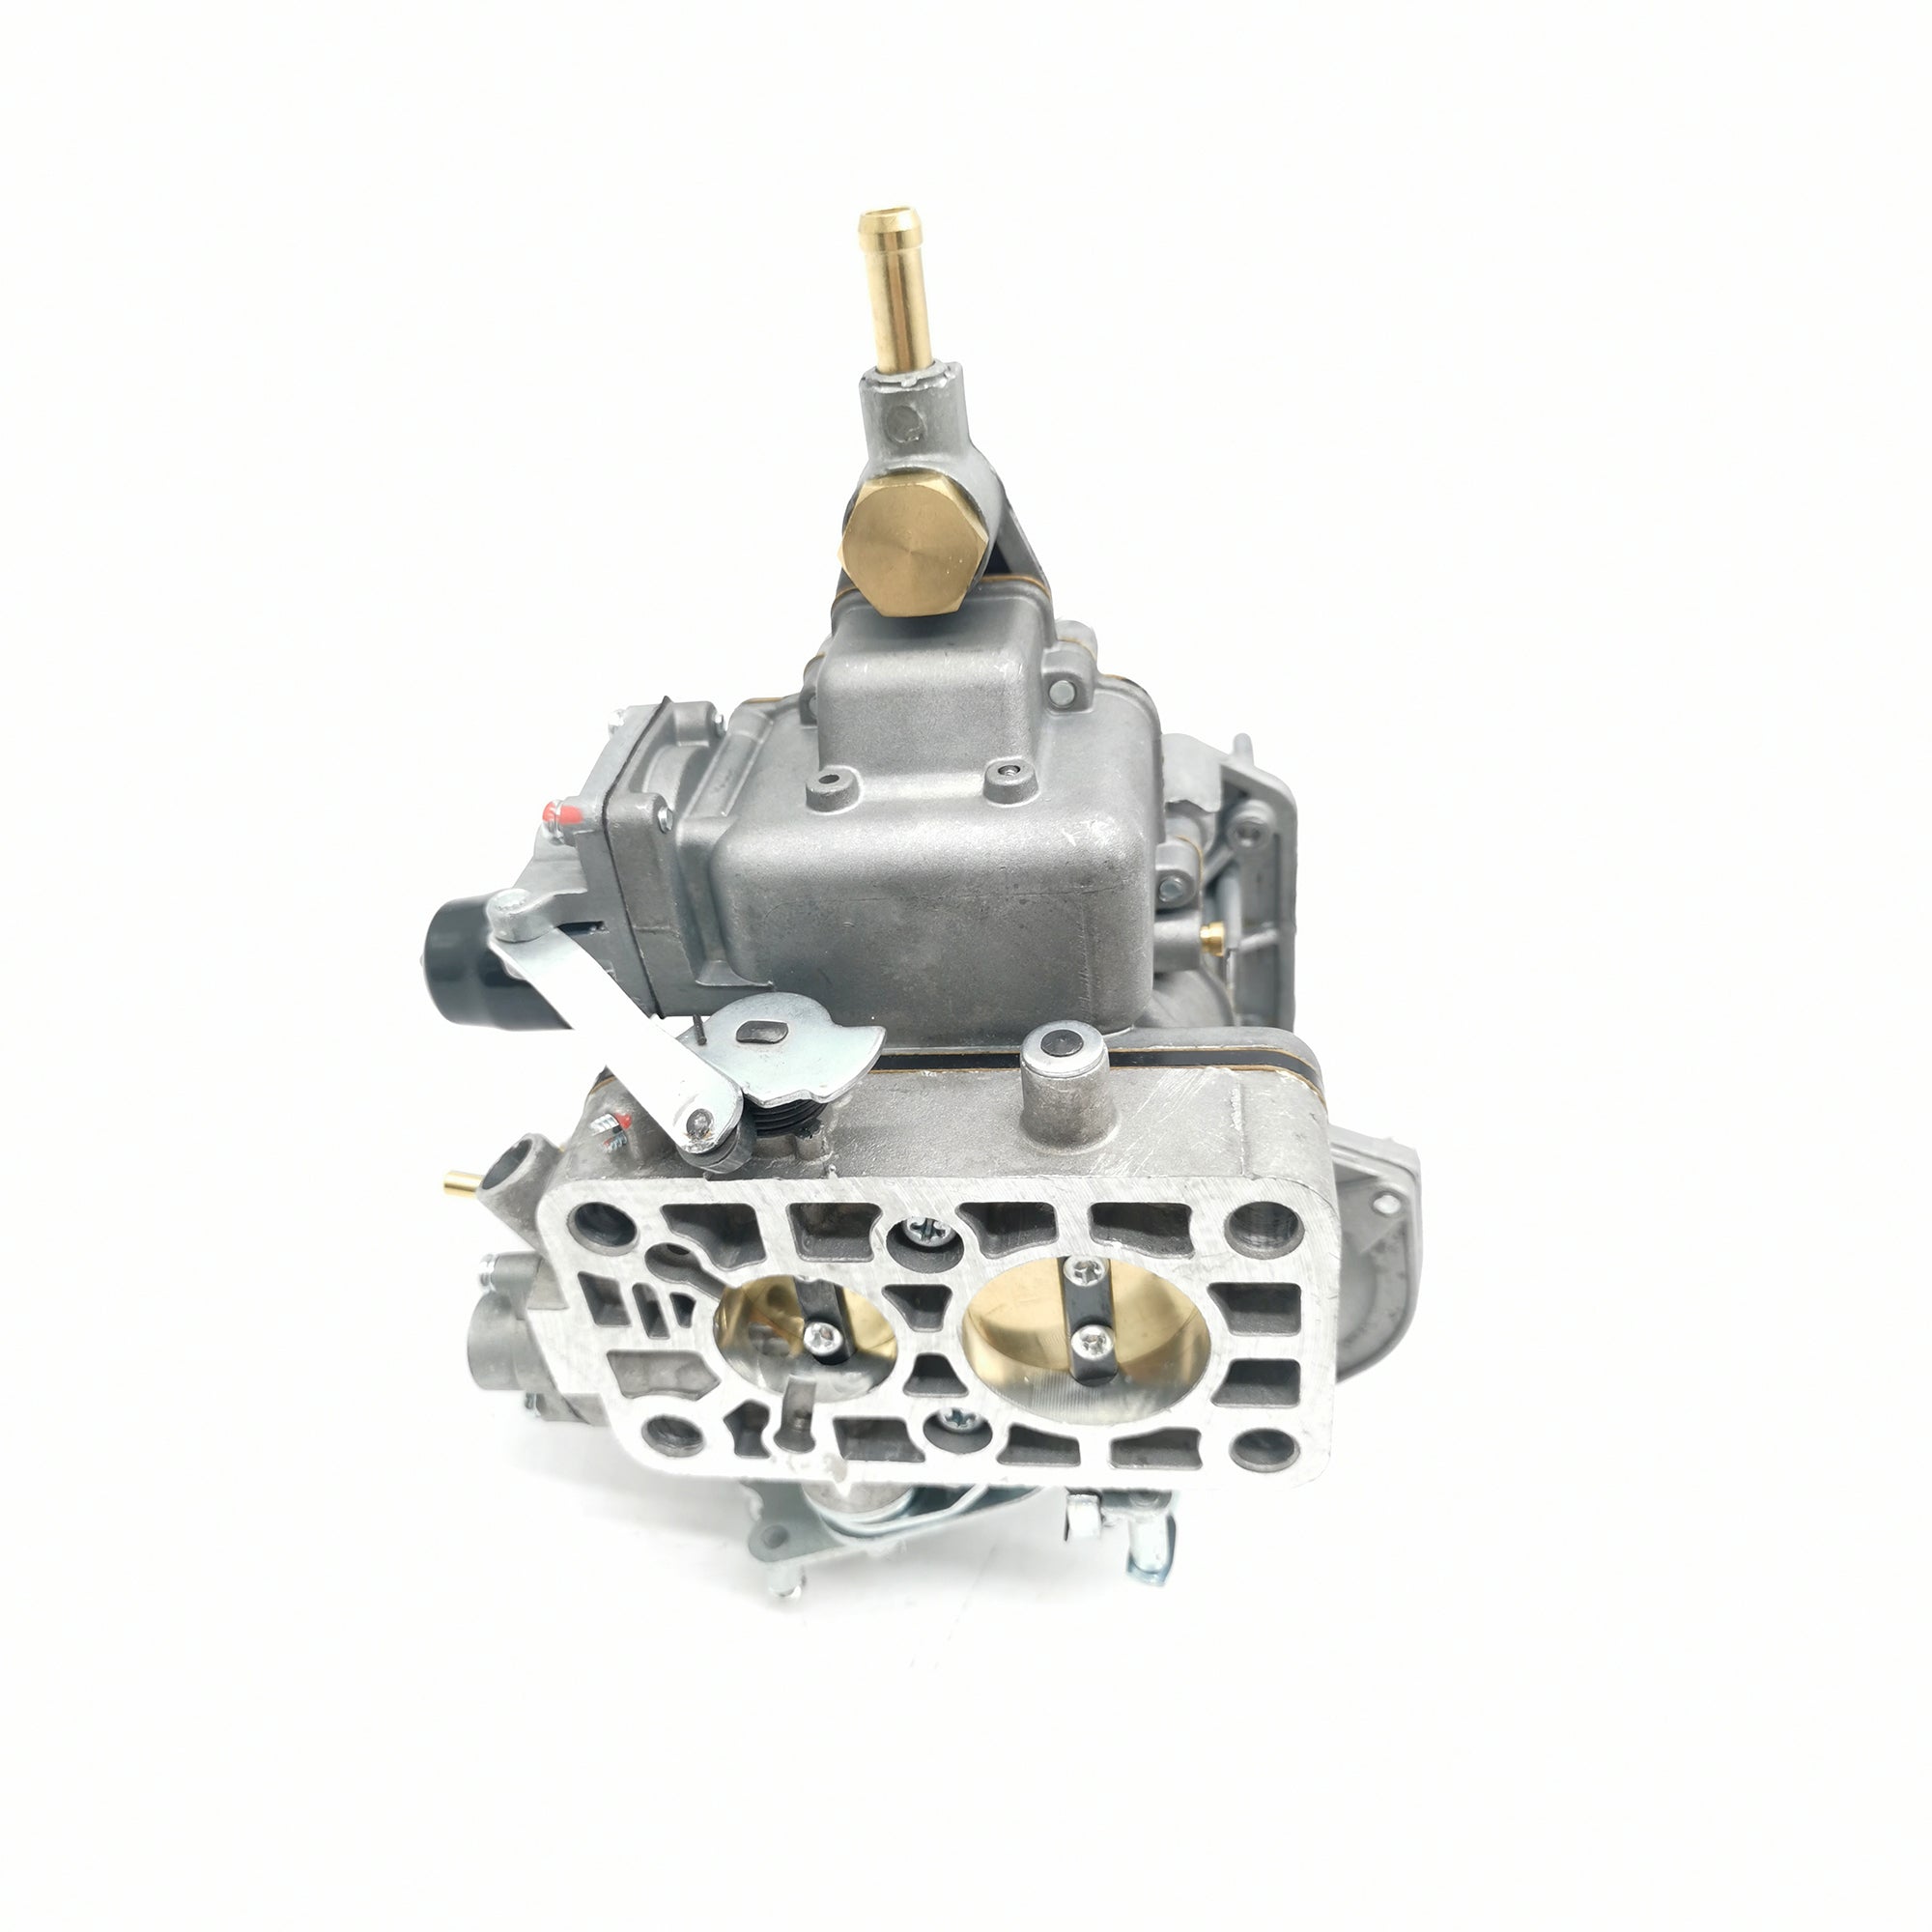 Compatible with Carburetor 2107-1107010-20 for Lada 2101-2107 Niva 1600